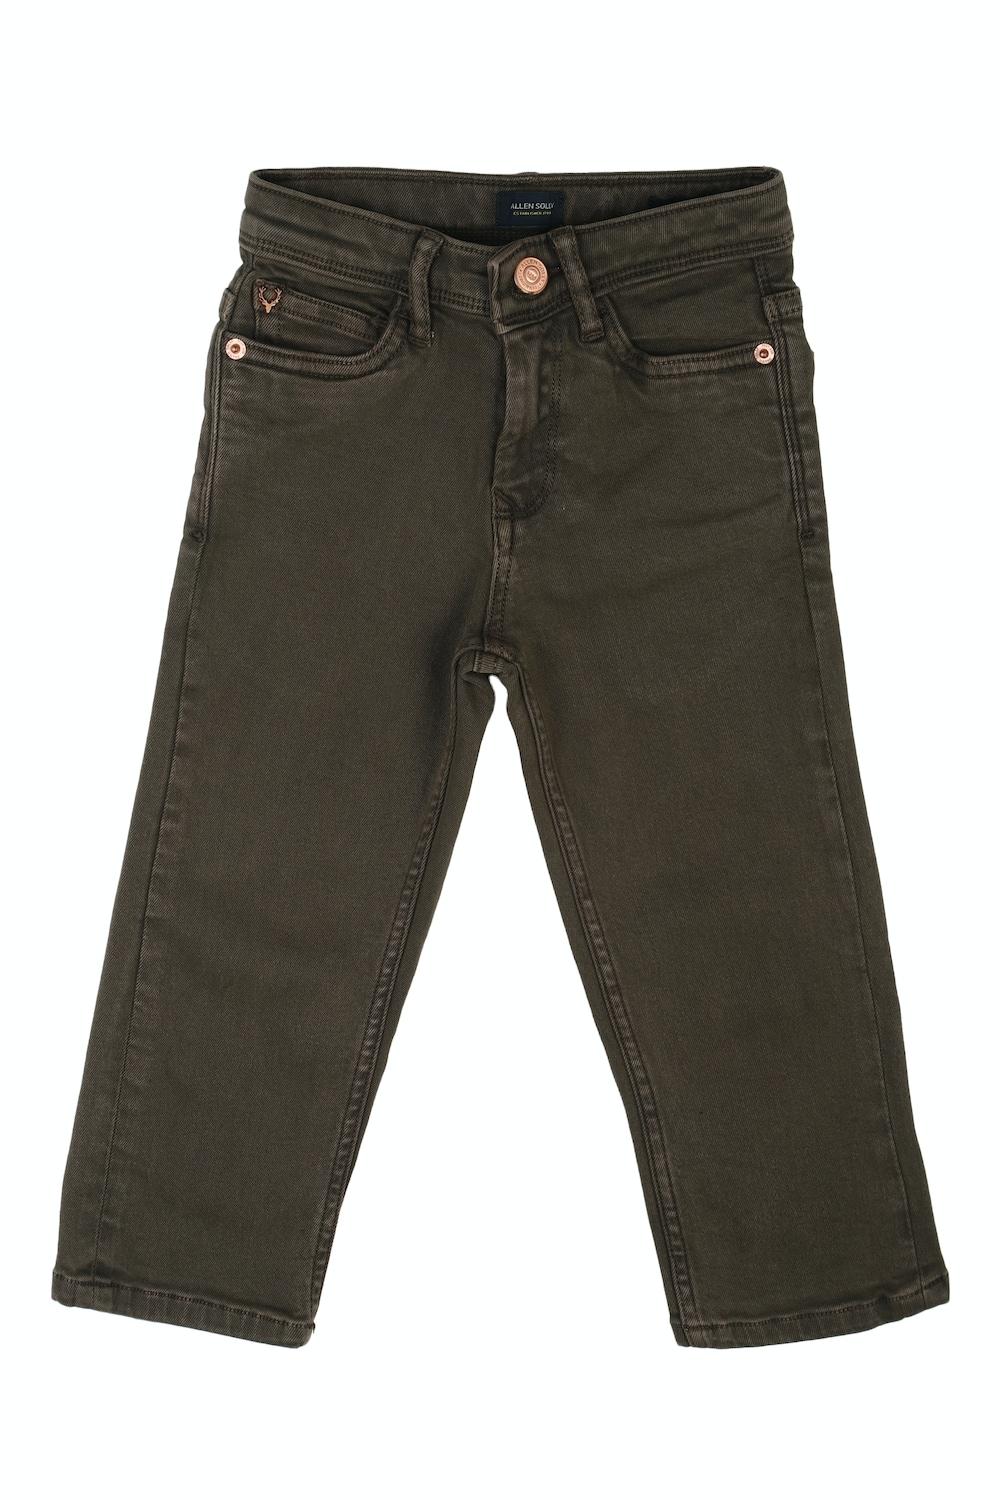 Boys Brown Slim Fit Jeans By Allen Solly